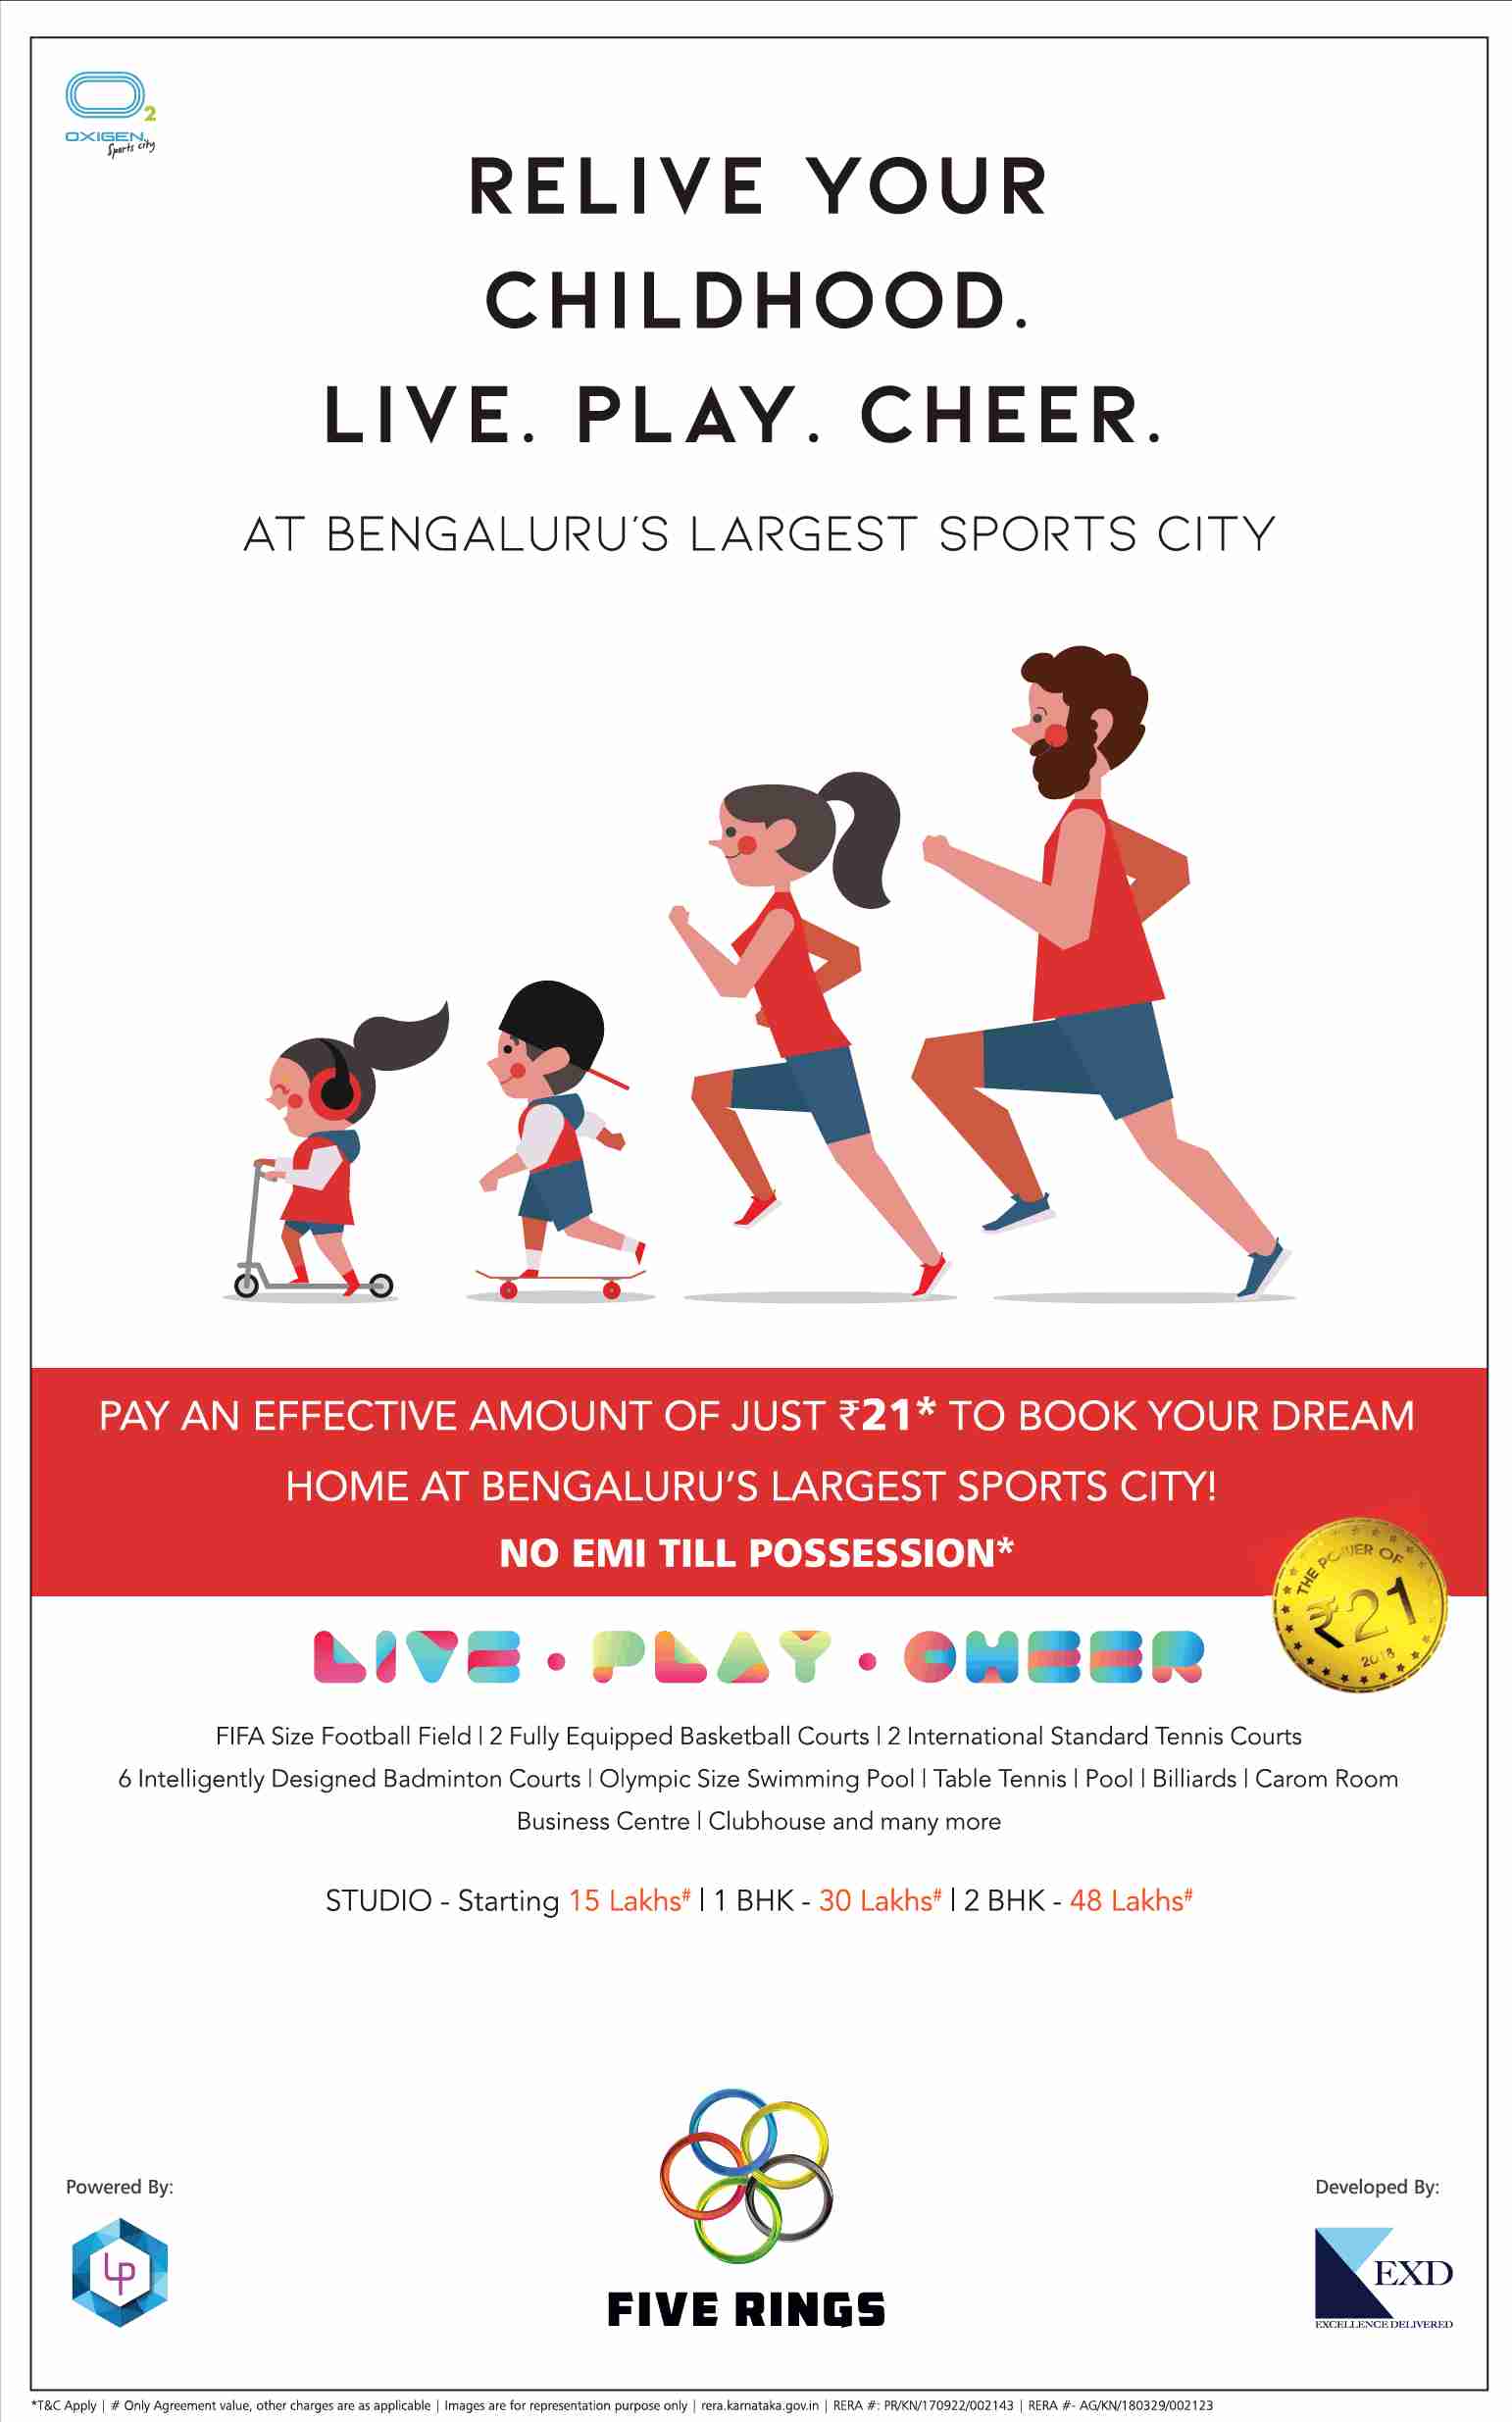 Pay an effective amount of just Rs. 21 to book your dream home at EXD Five Rings in Bangalore